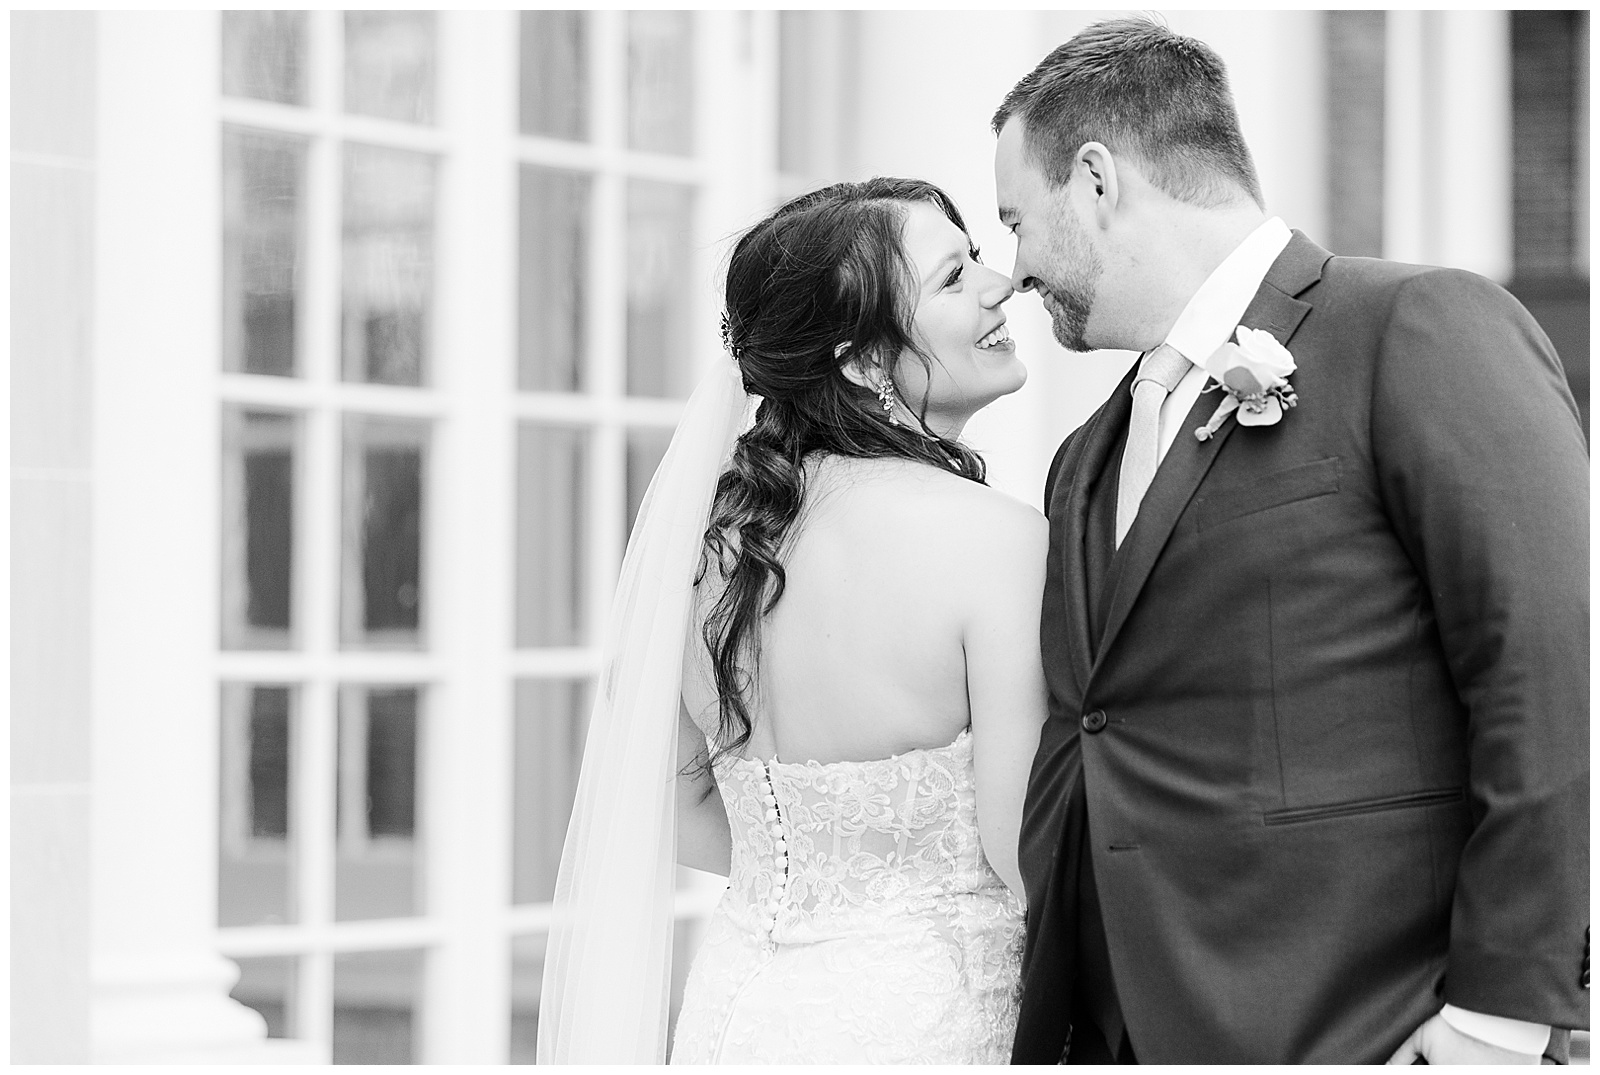 Adorable Light and Airy Bride Groom Outdoor Wedding Portraits at Separk Mansion in Gastonia, NC | Kevyn Dixon Photography